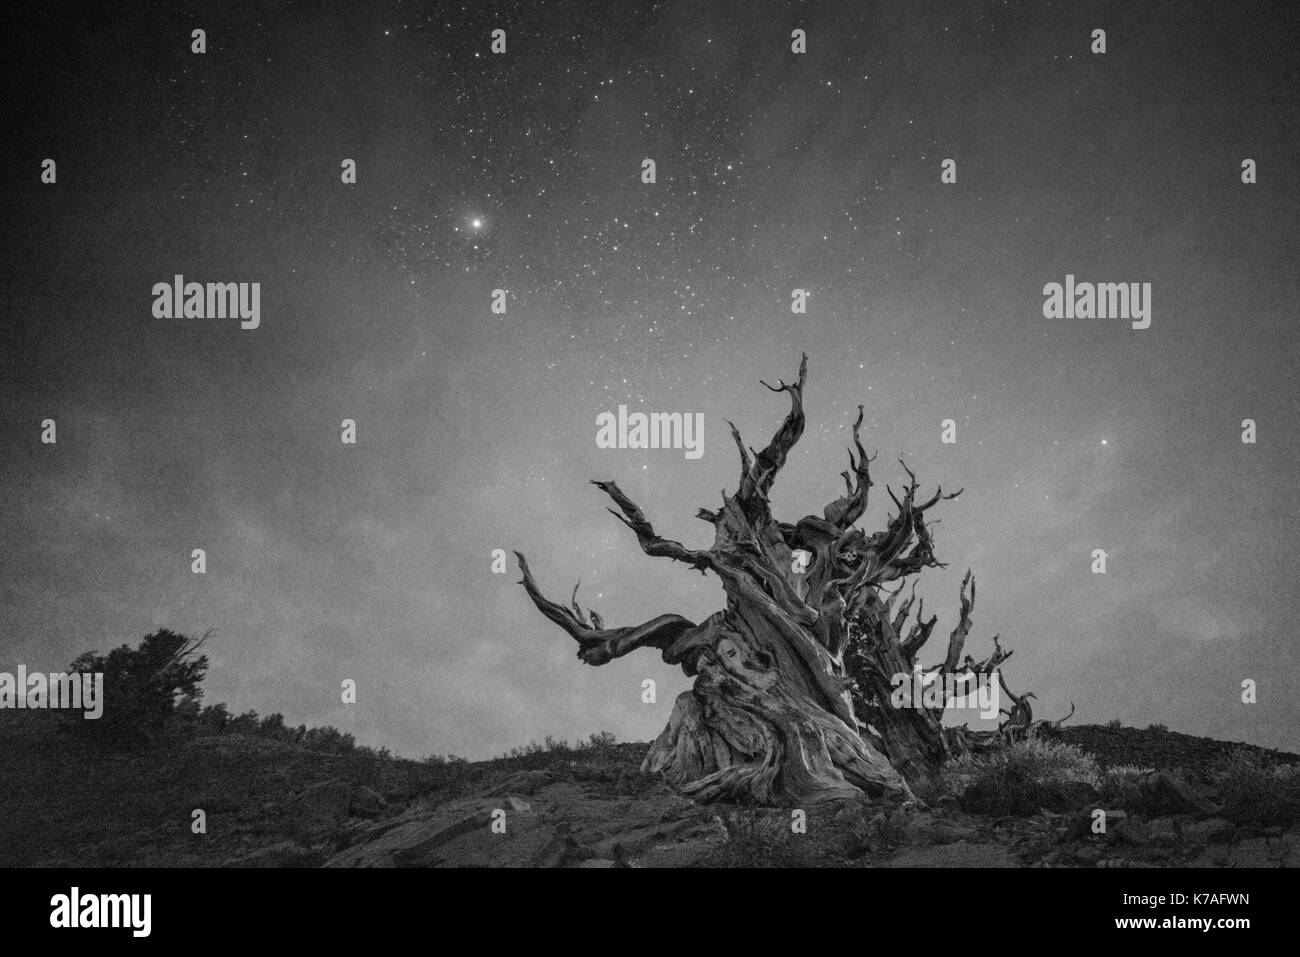 5,000 year old Bristle Cone Pine with Milky Way in Black and White Stock Photo